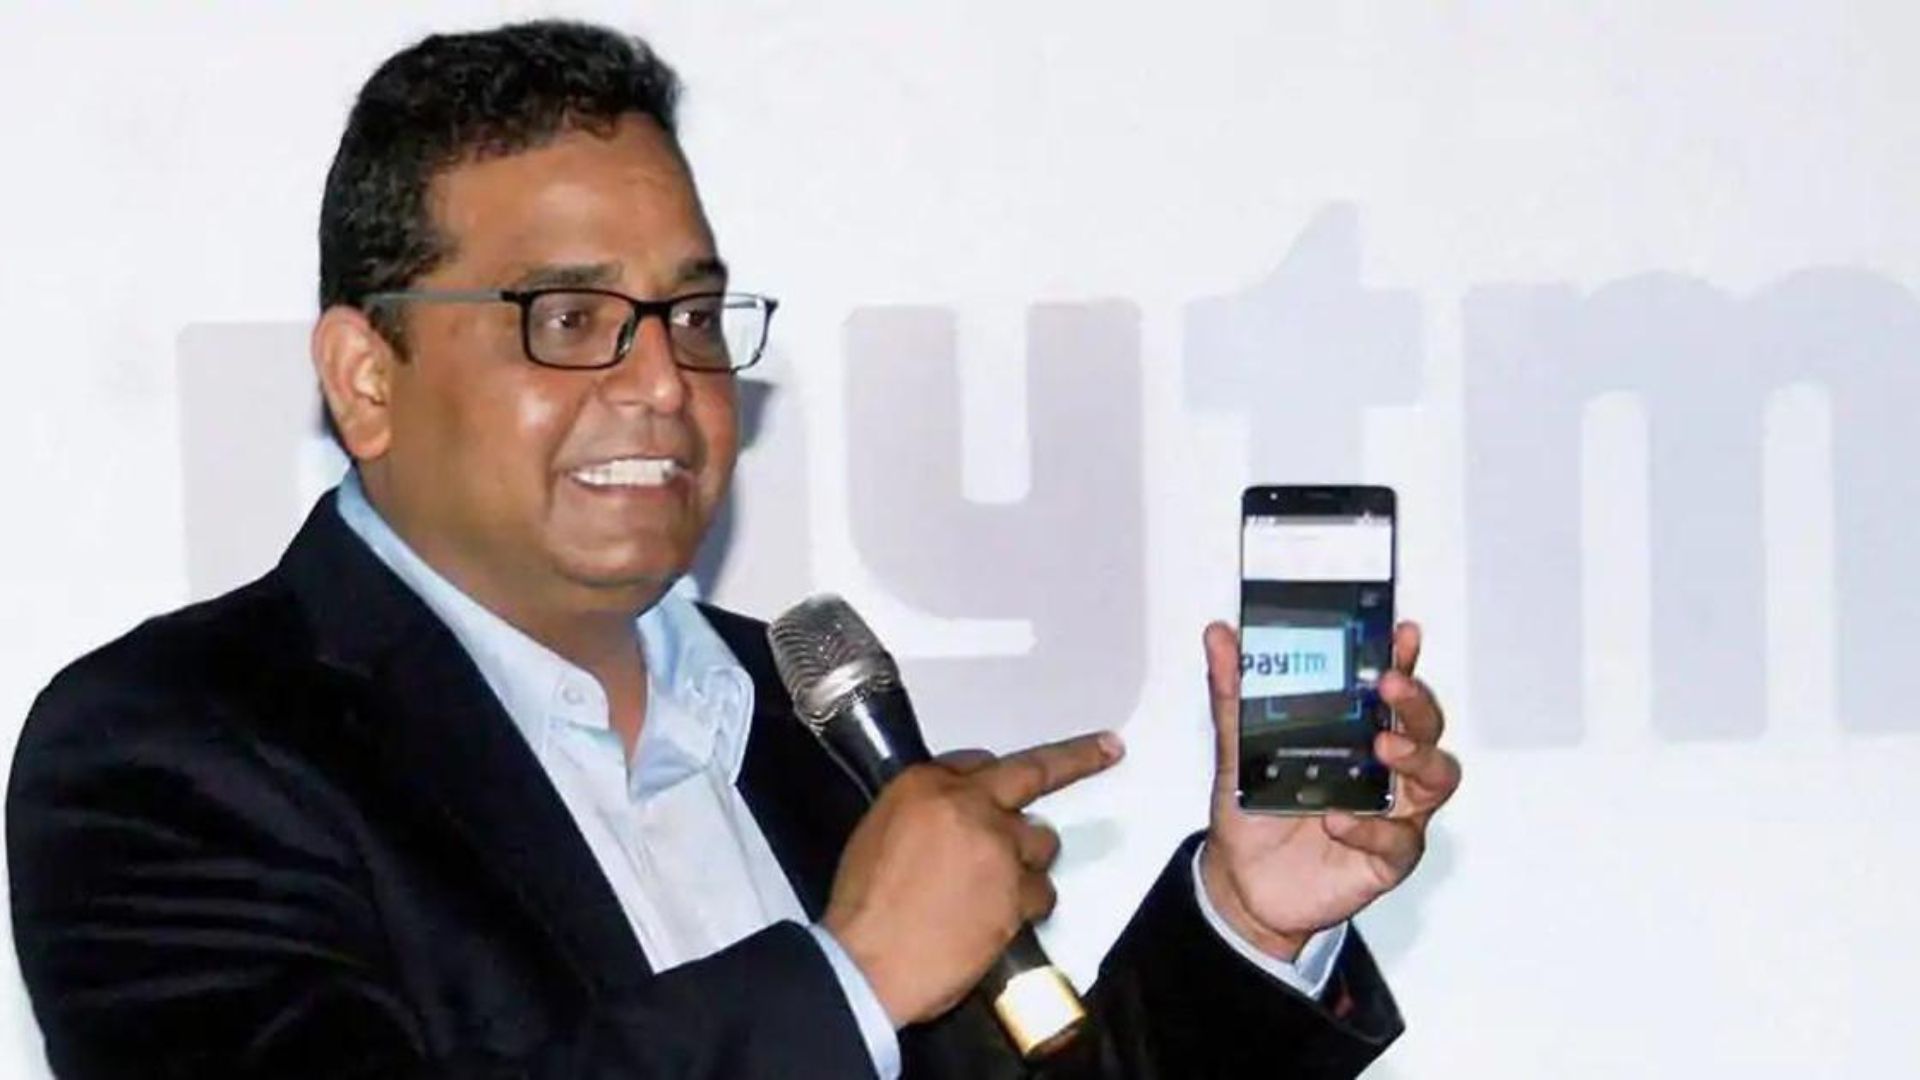 Sources: Paytm CEO meets Finance Minister Nirmala Sitharaman; discusses ongoing challenges